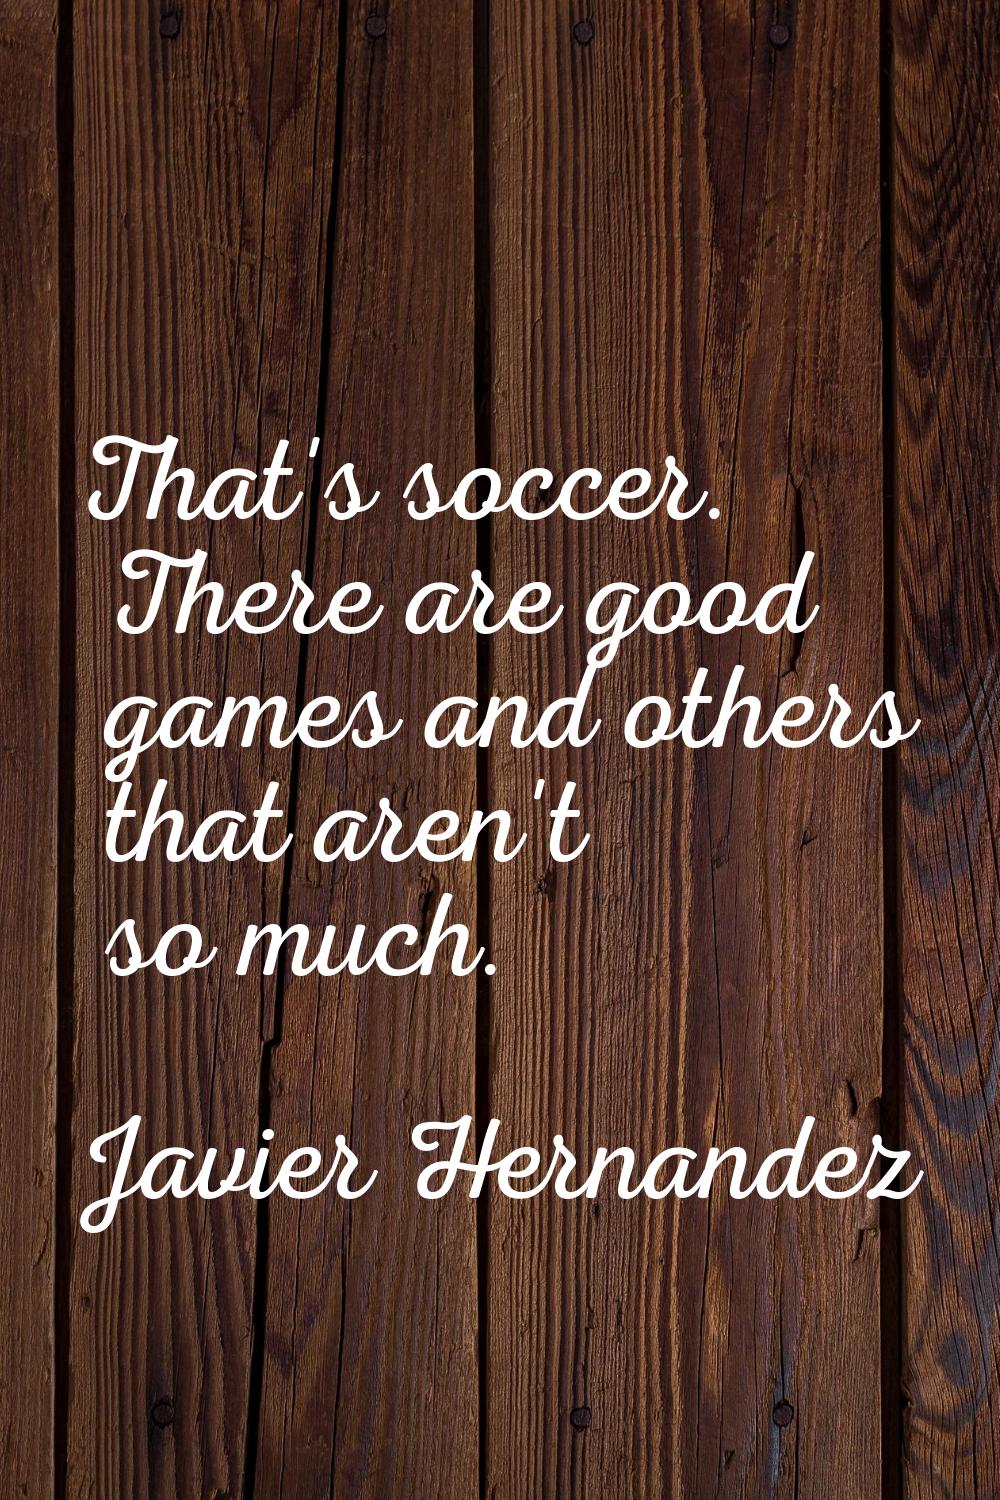 That's soccer. There are good games and others that aren't so much.